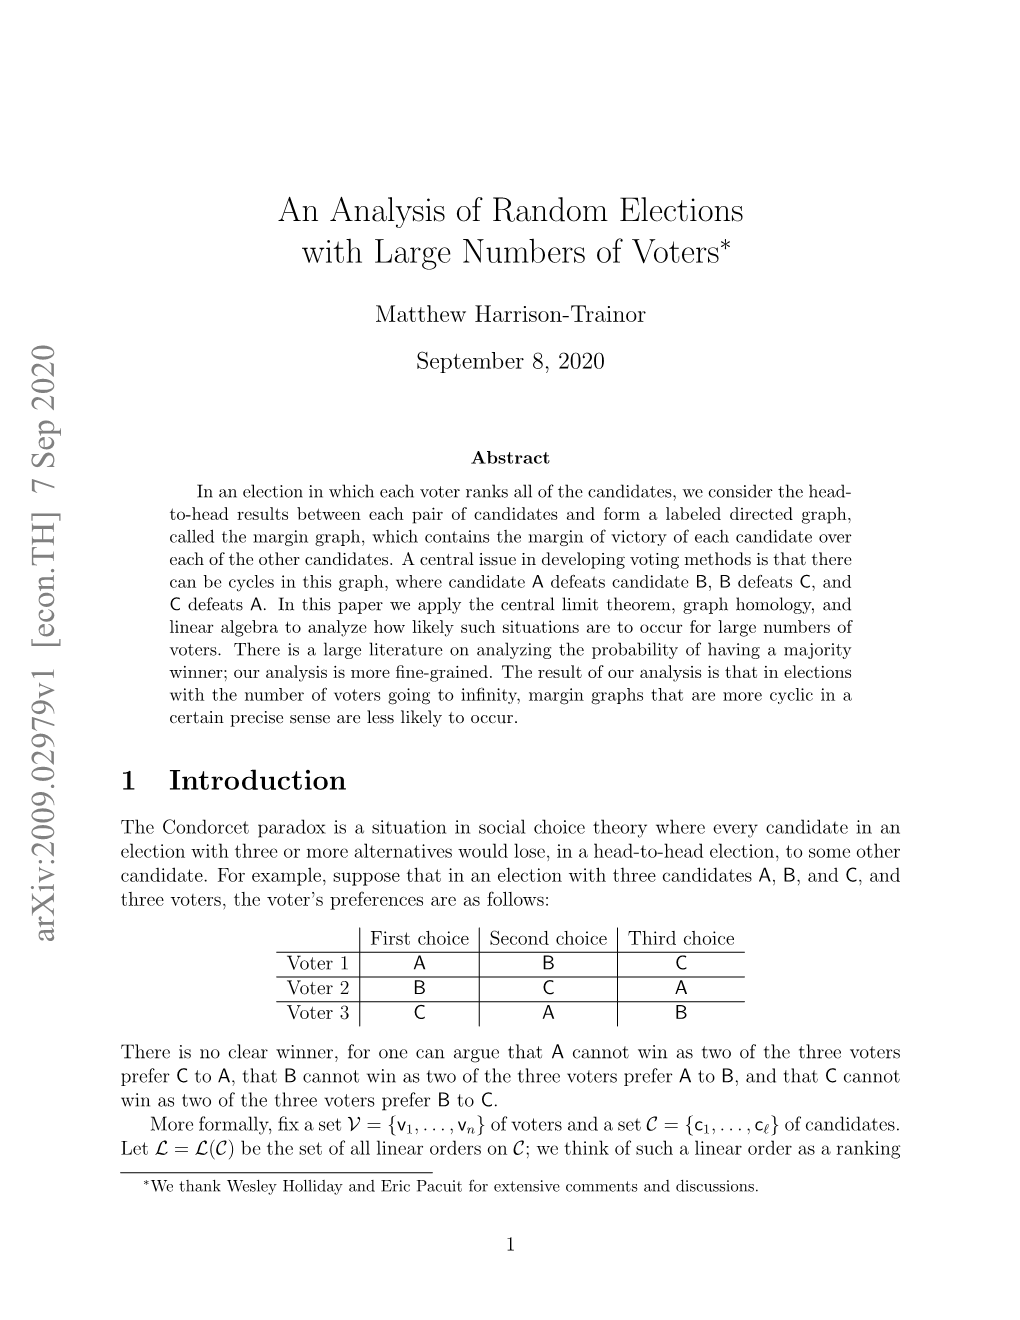 An Analysis of Random Elections with Large Numbers of Voters Arxiv